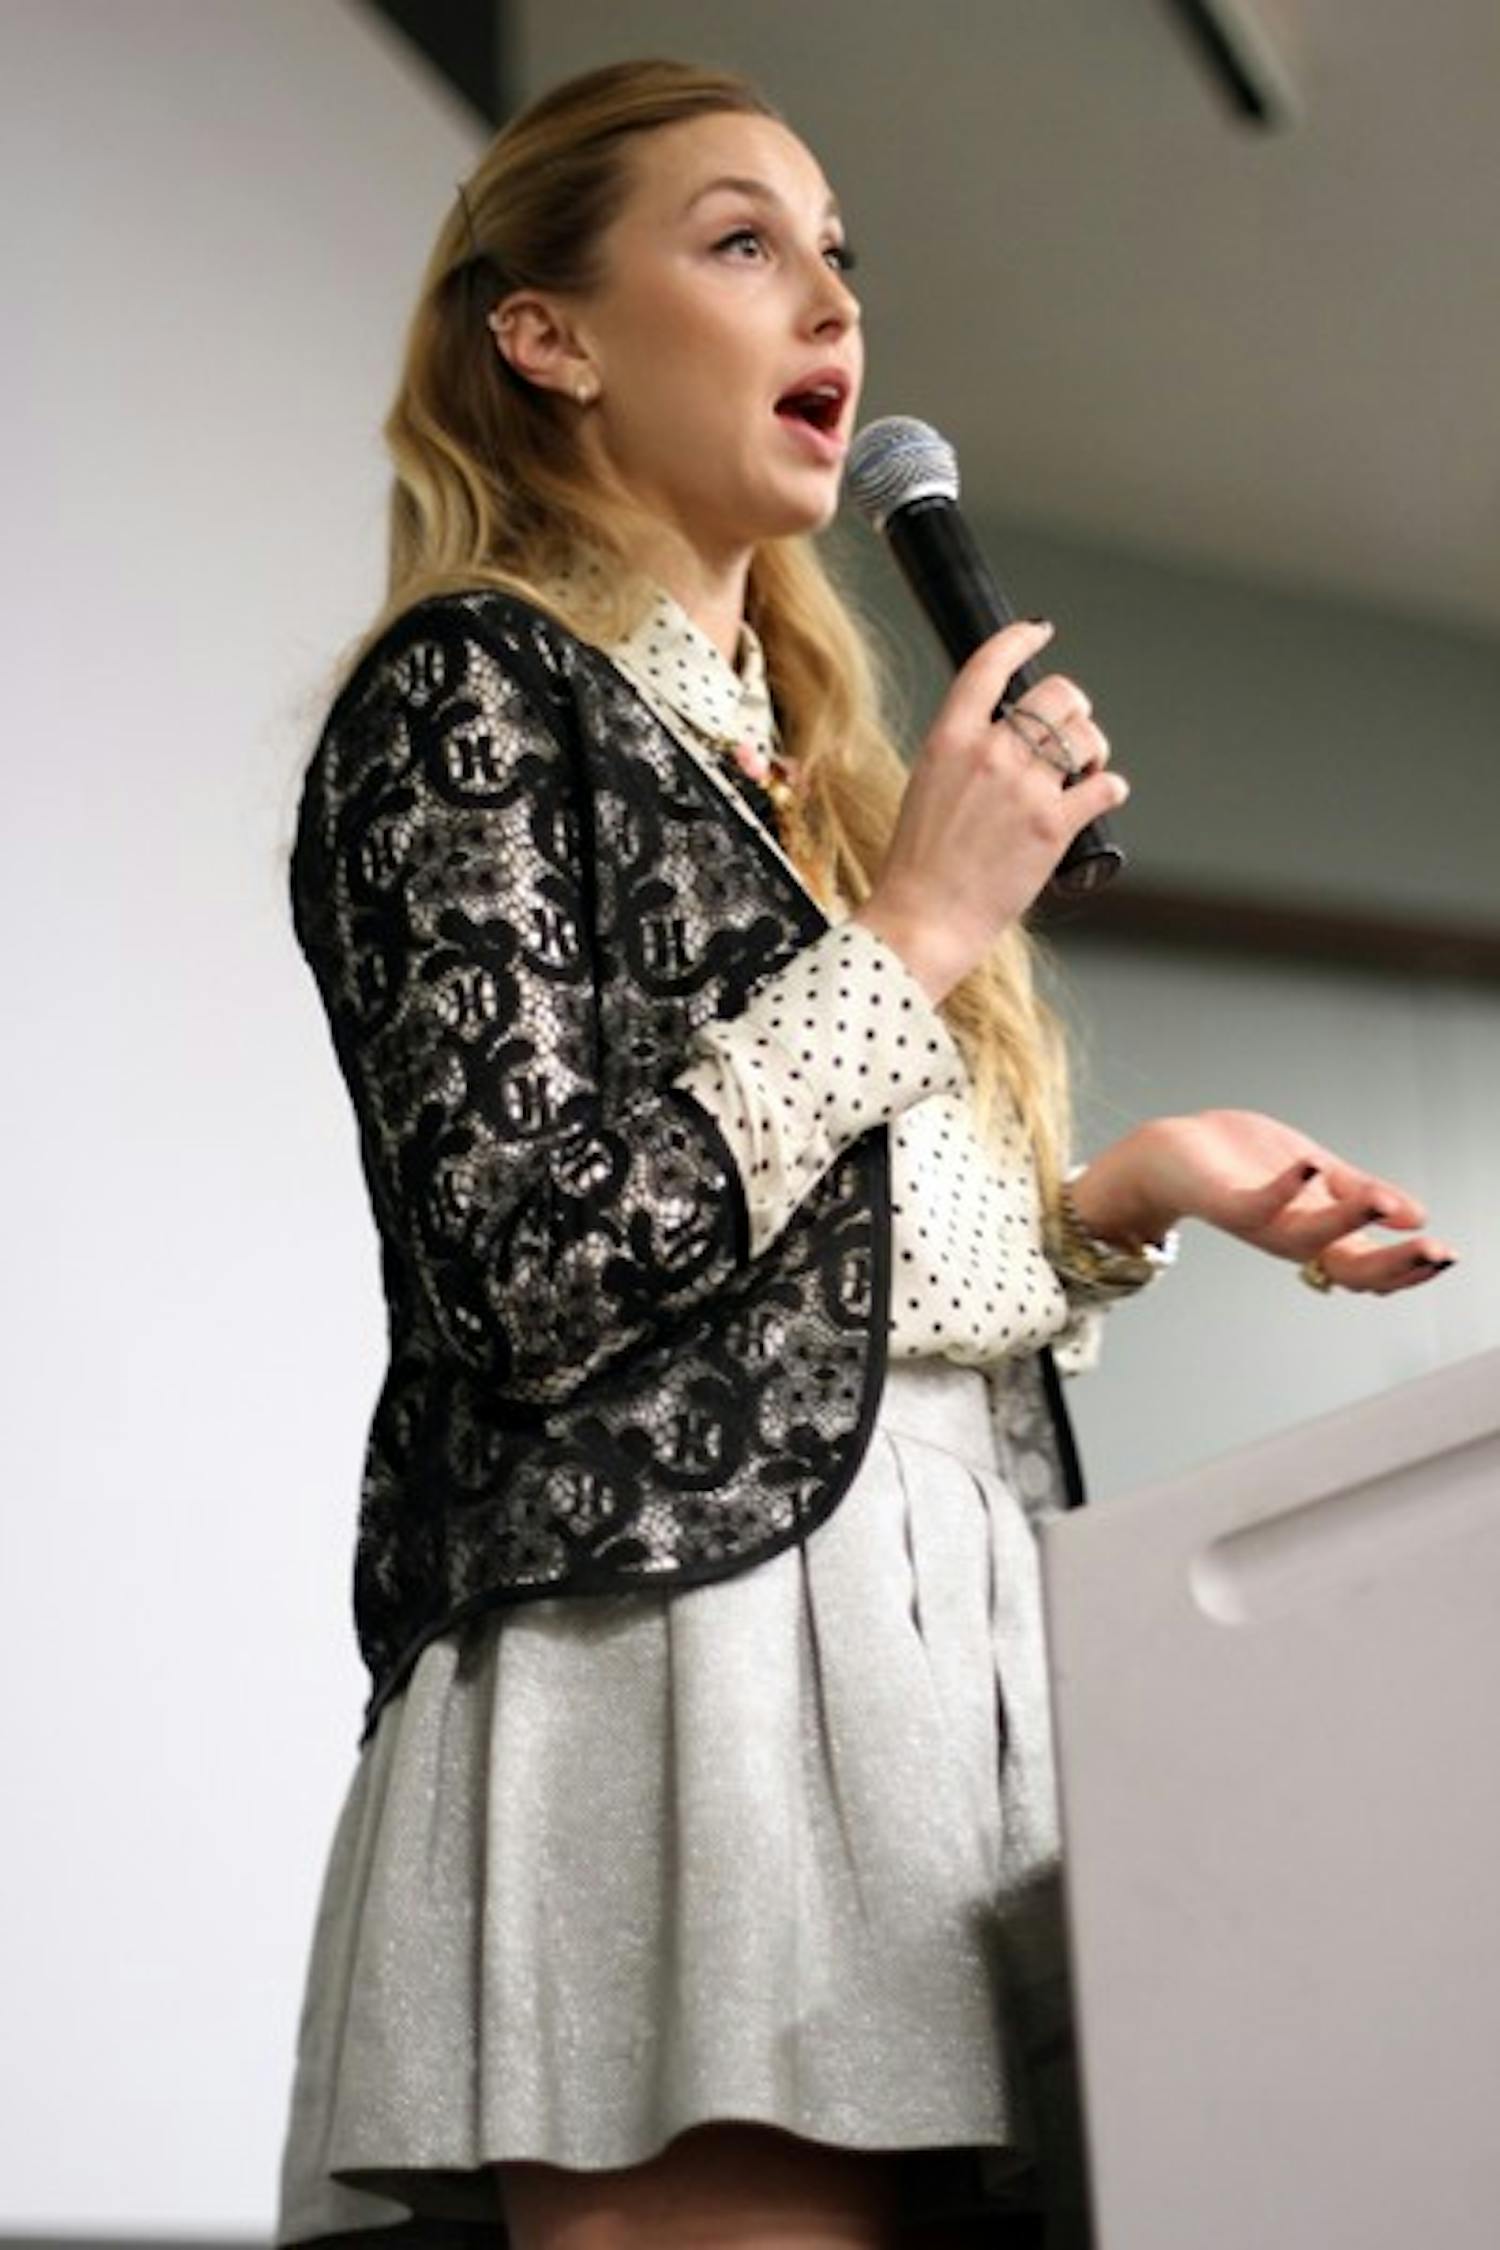 Fashion designer and star of reality show "The Hills" Whitney Port spoke to ASU students on the Tempe campus Wednesday night about her fashion career and how to make it as an entrepreneur. (Photo by Lisa Bartoli)